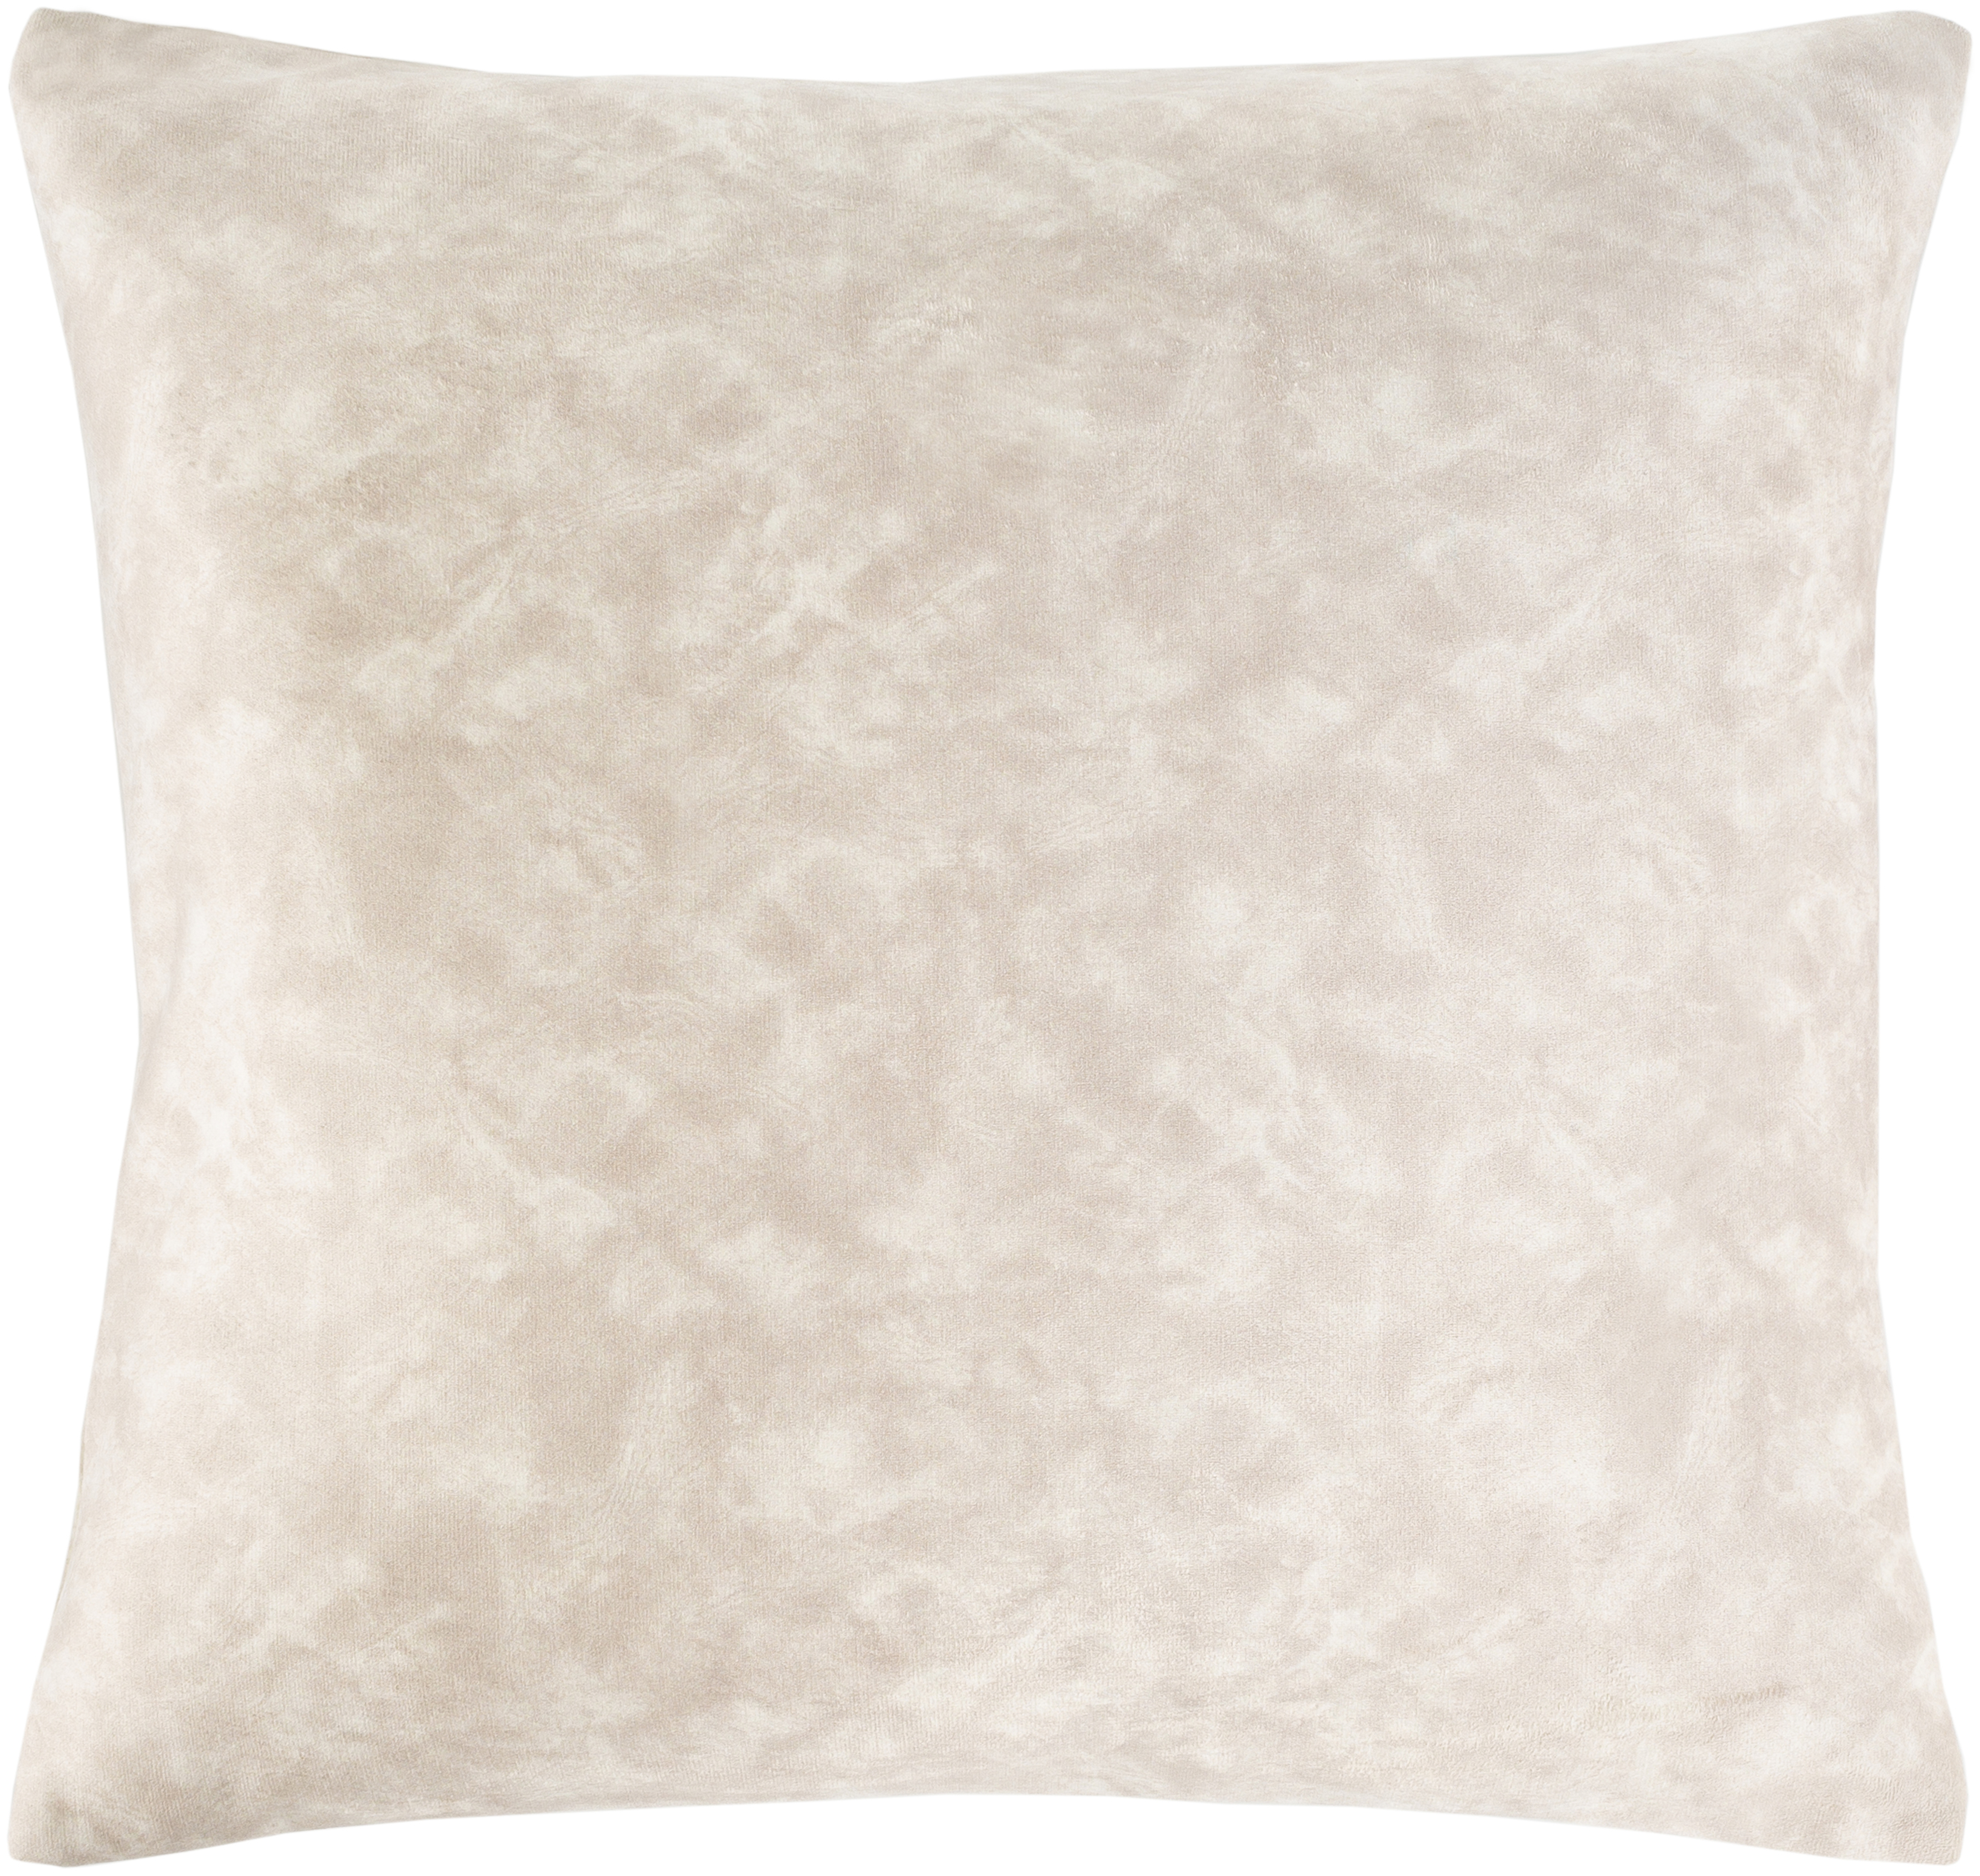 Collins Throw Pillow, 20" x 20", with down insert - Surya